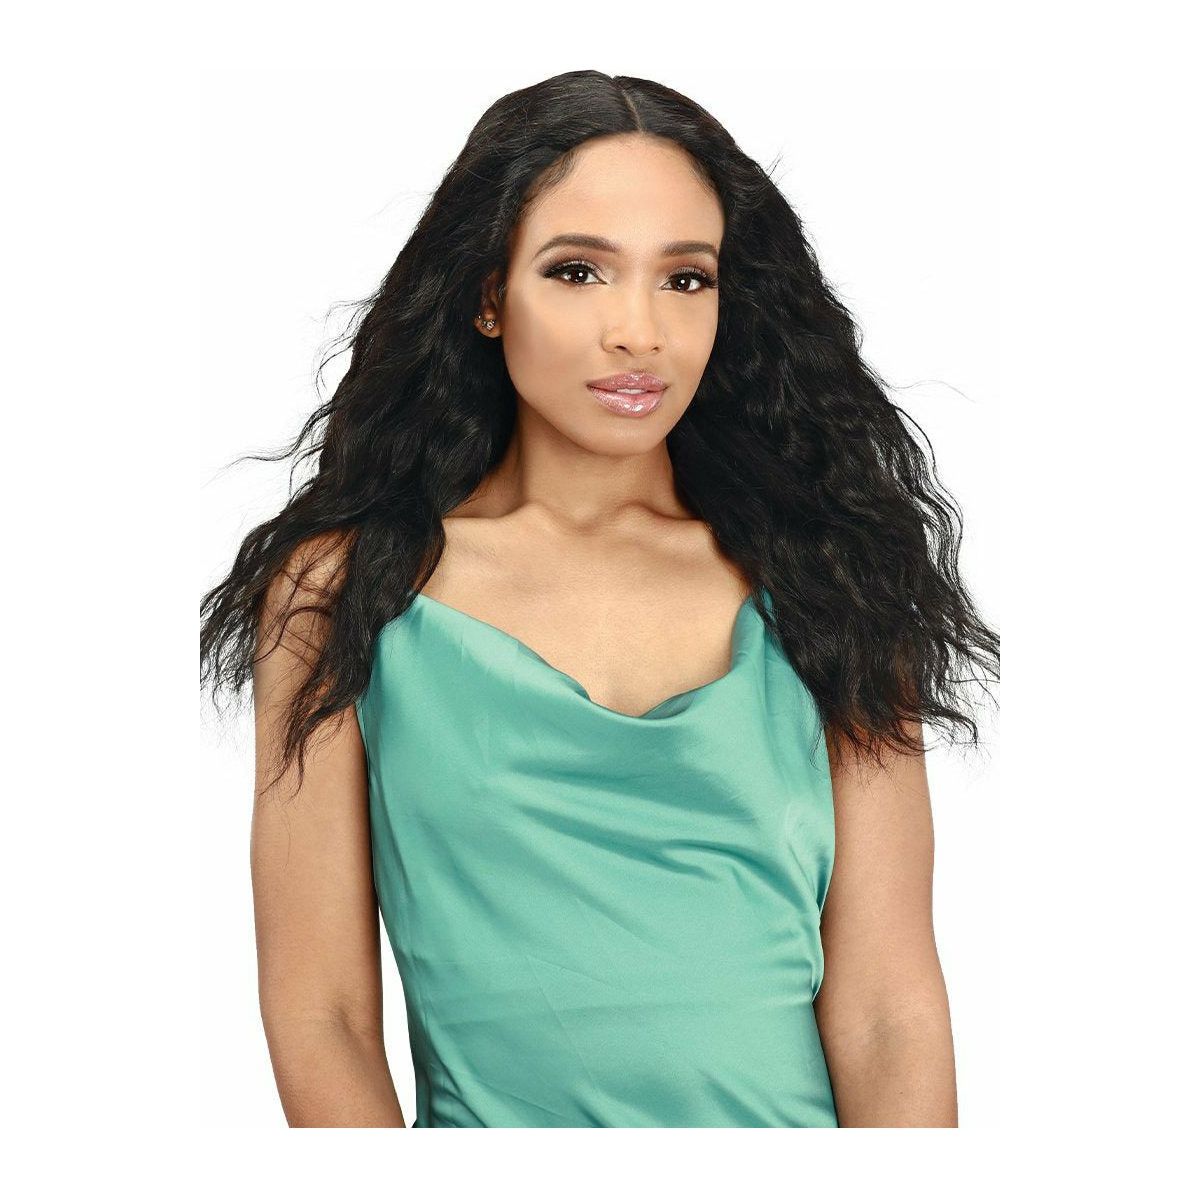 Zury Sis 100 Brazilian Virgin Remy Human Hair Wet And Wavy Lace Frontal